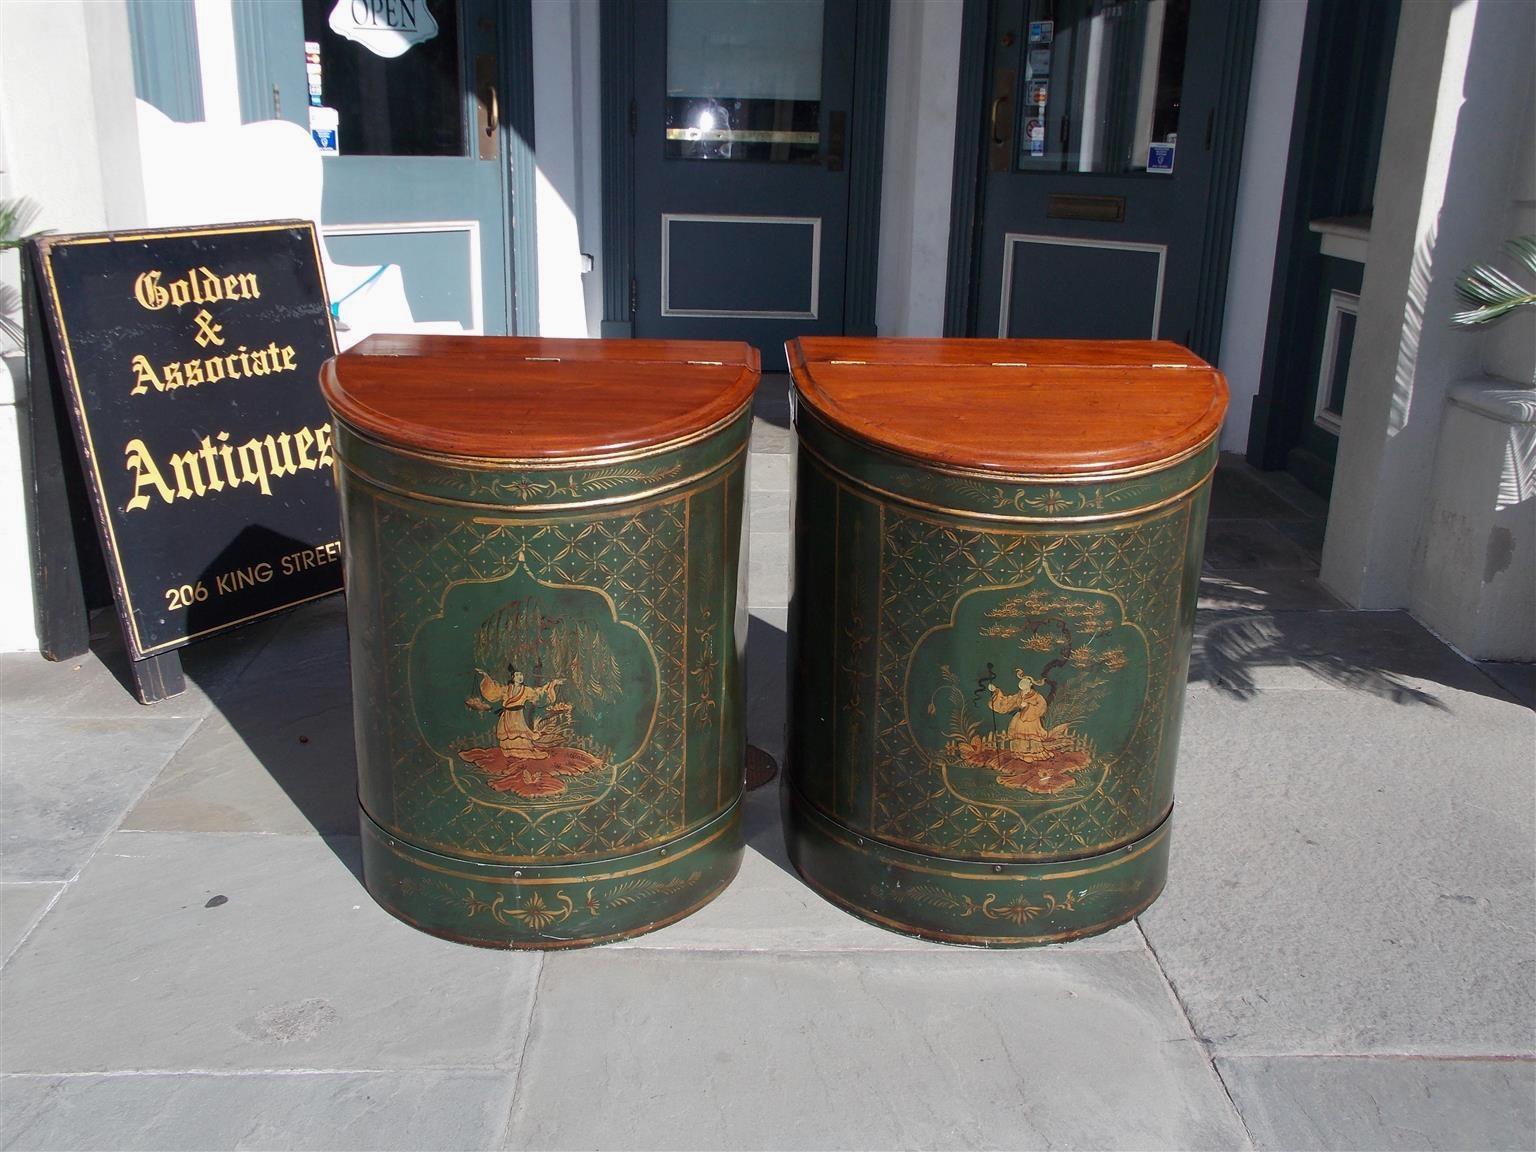 Pair of Chinese mahogany and tin hinged painted tea bins with gilt figural stenciling and decorative landscape scenes with bird motif, Mid-19th century.